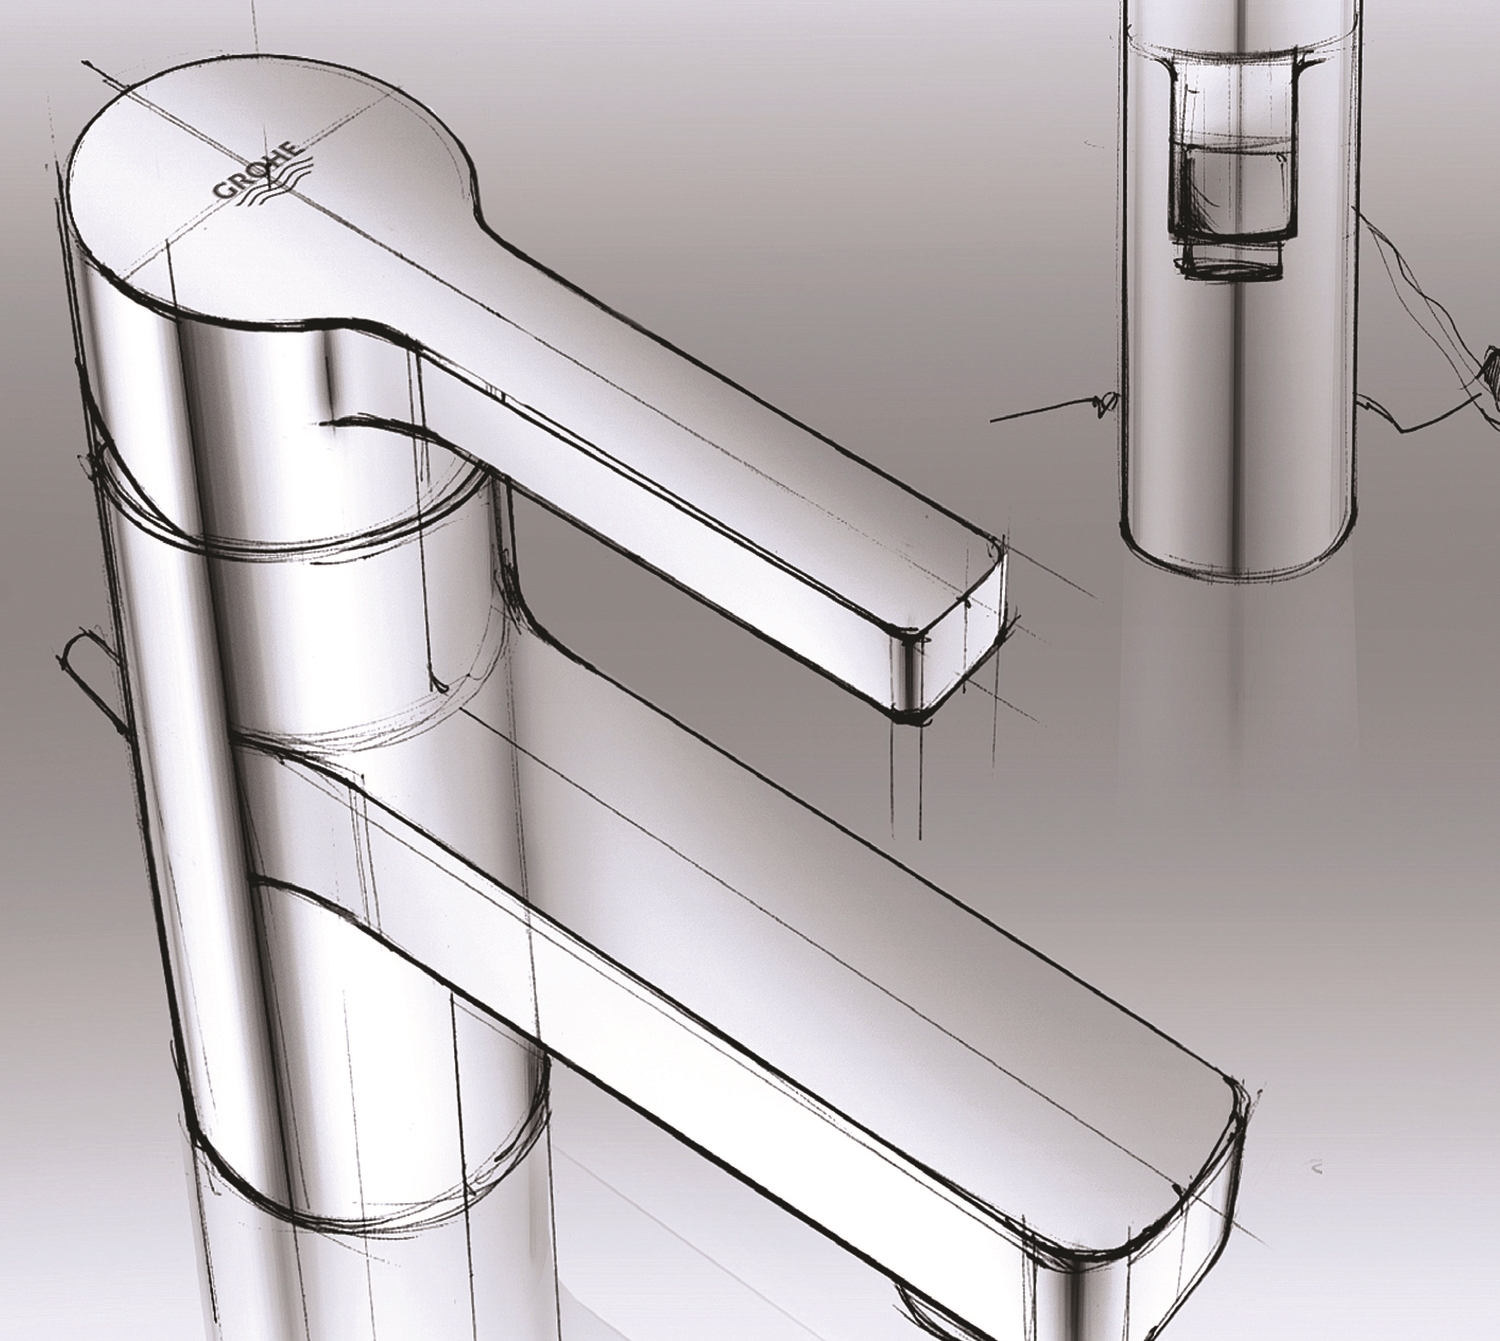 Image shows photography of silver tap